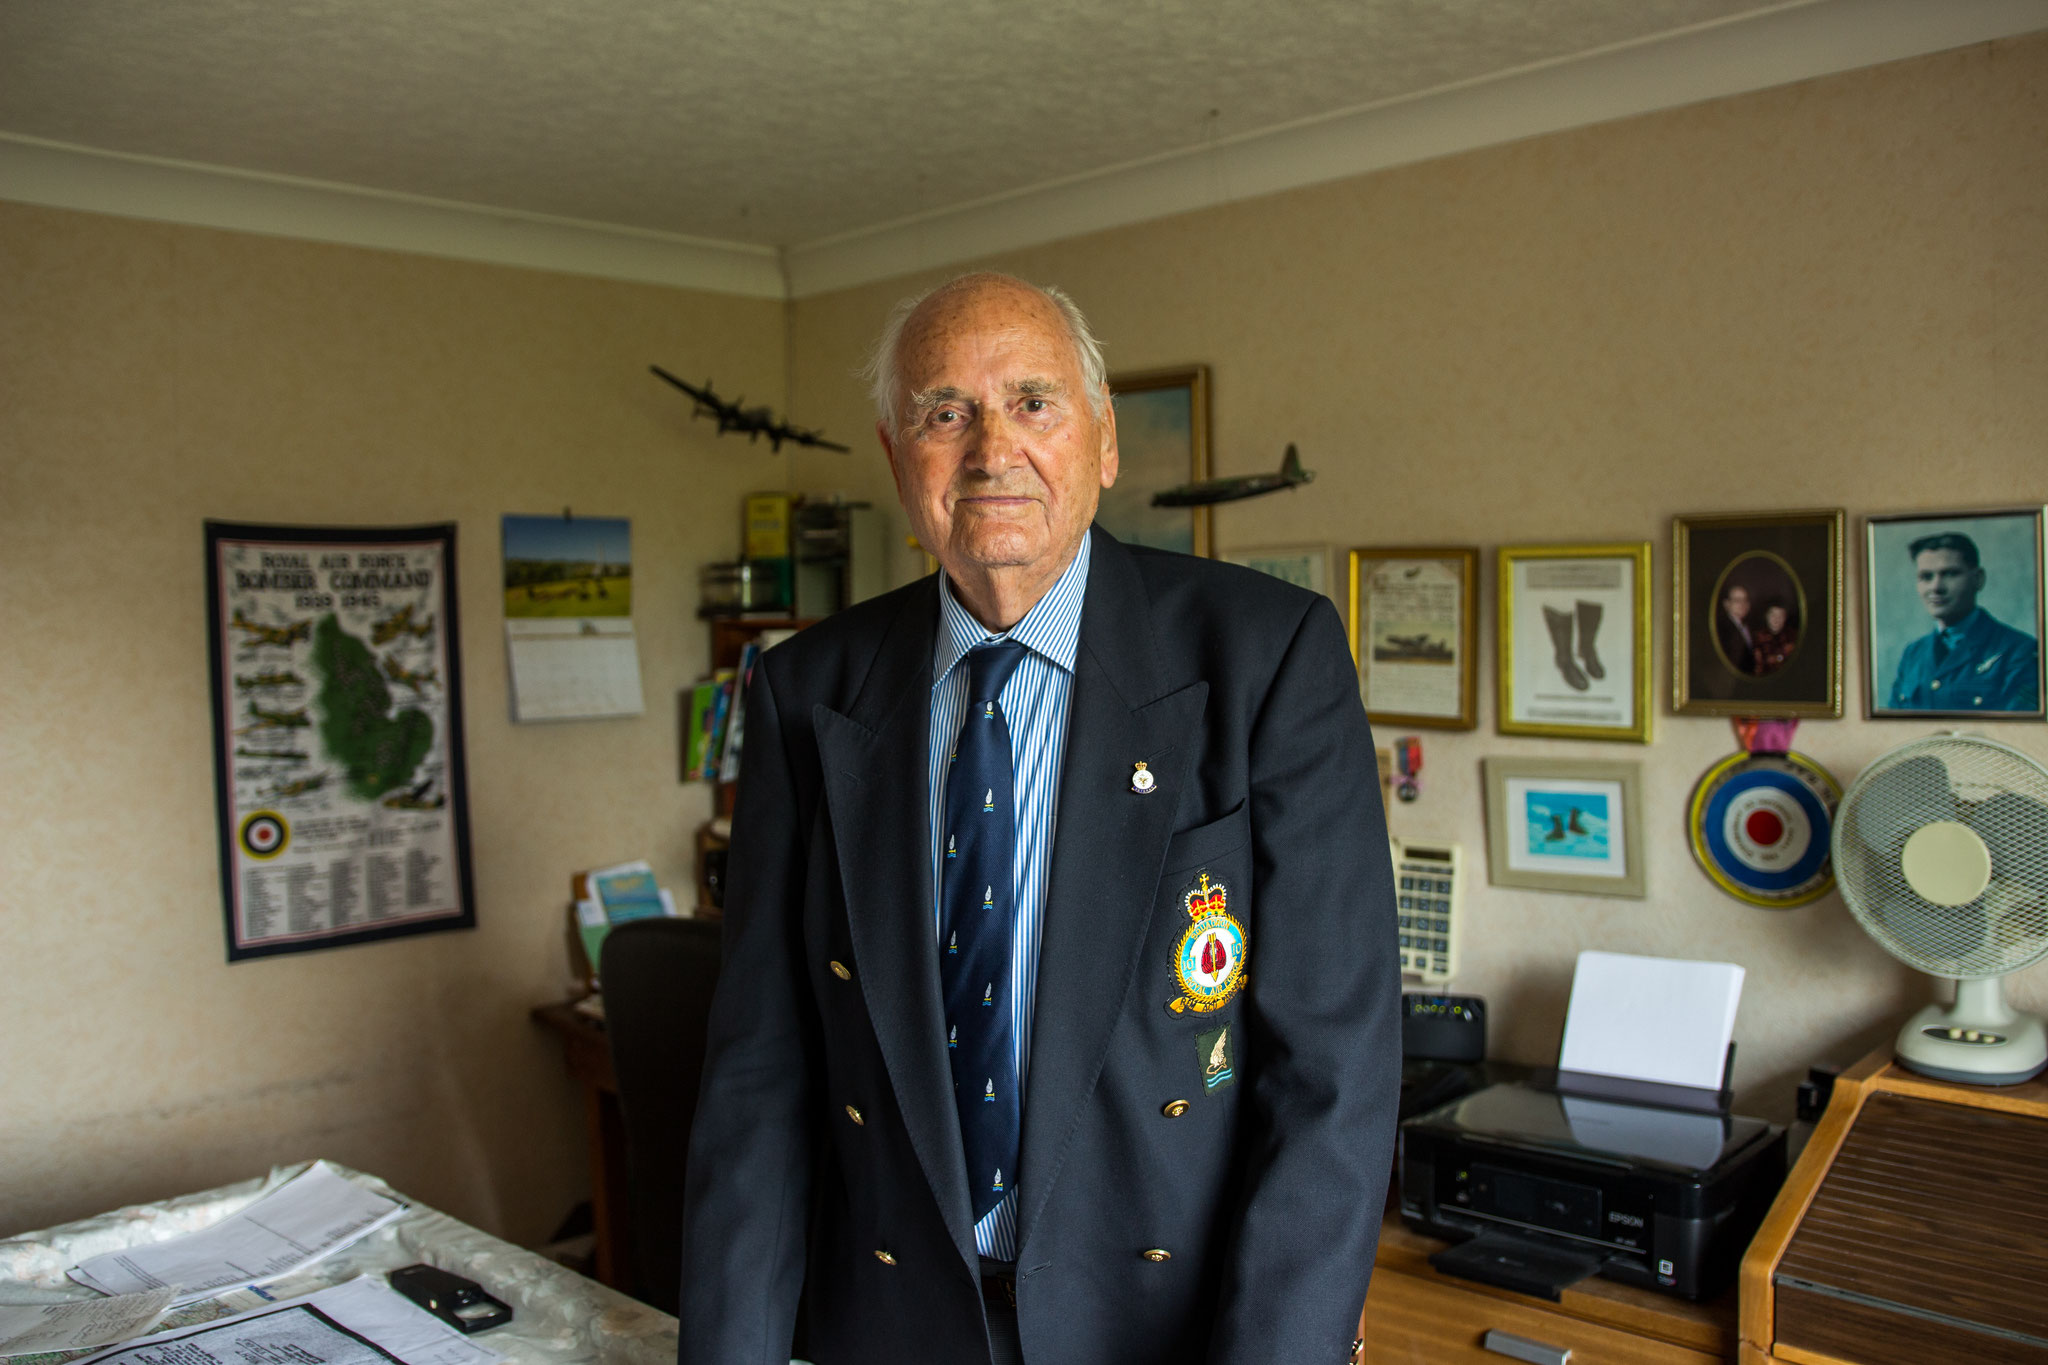 WW II veteran Ron Tomlin in his home in Birmingham, July 2018. Tomlin was one of the Royal Airforce soldiers who bombarded the city of Hamburg during Operation 'Gomorrha' 1943. 